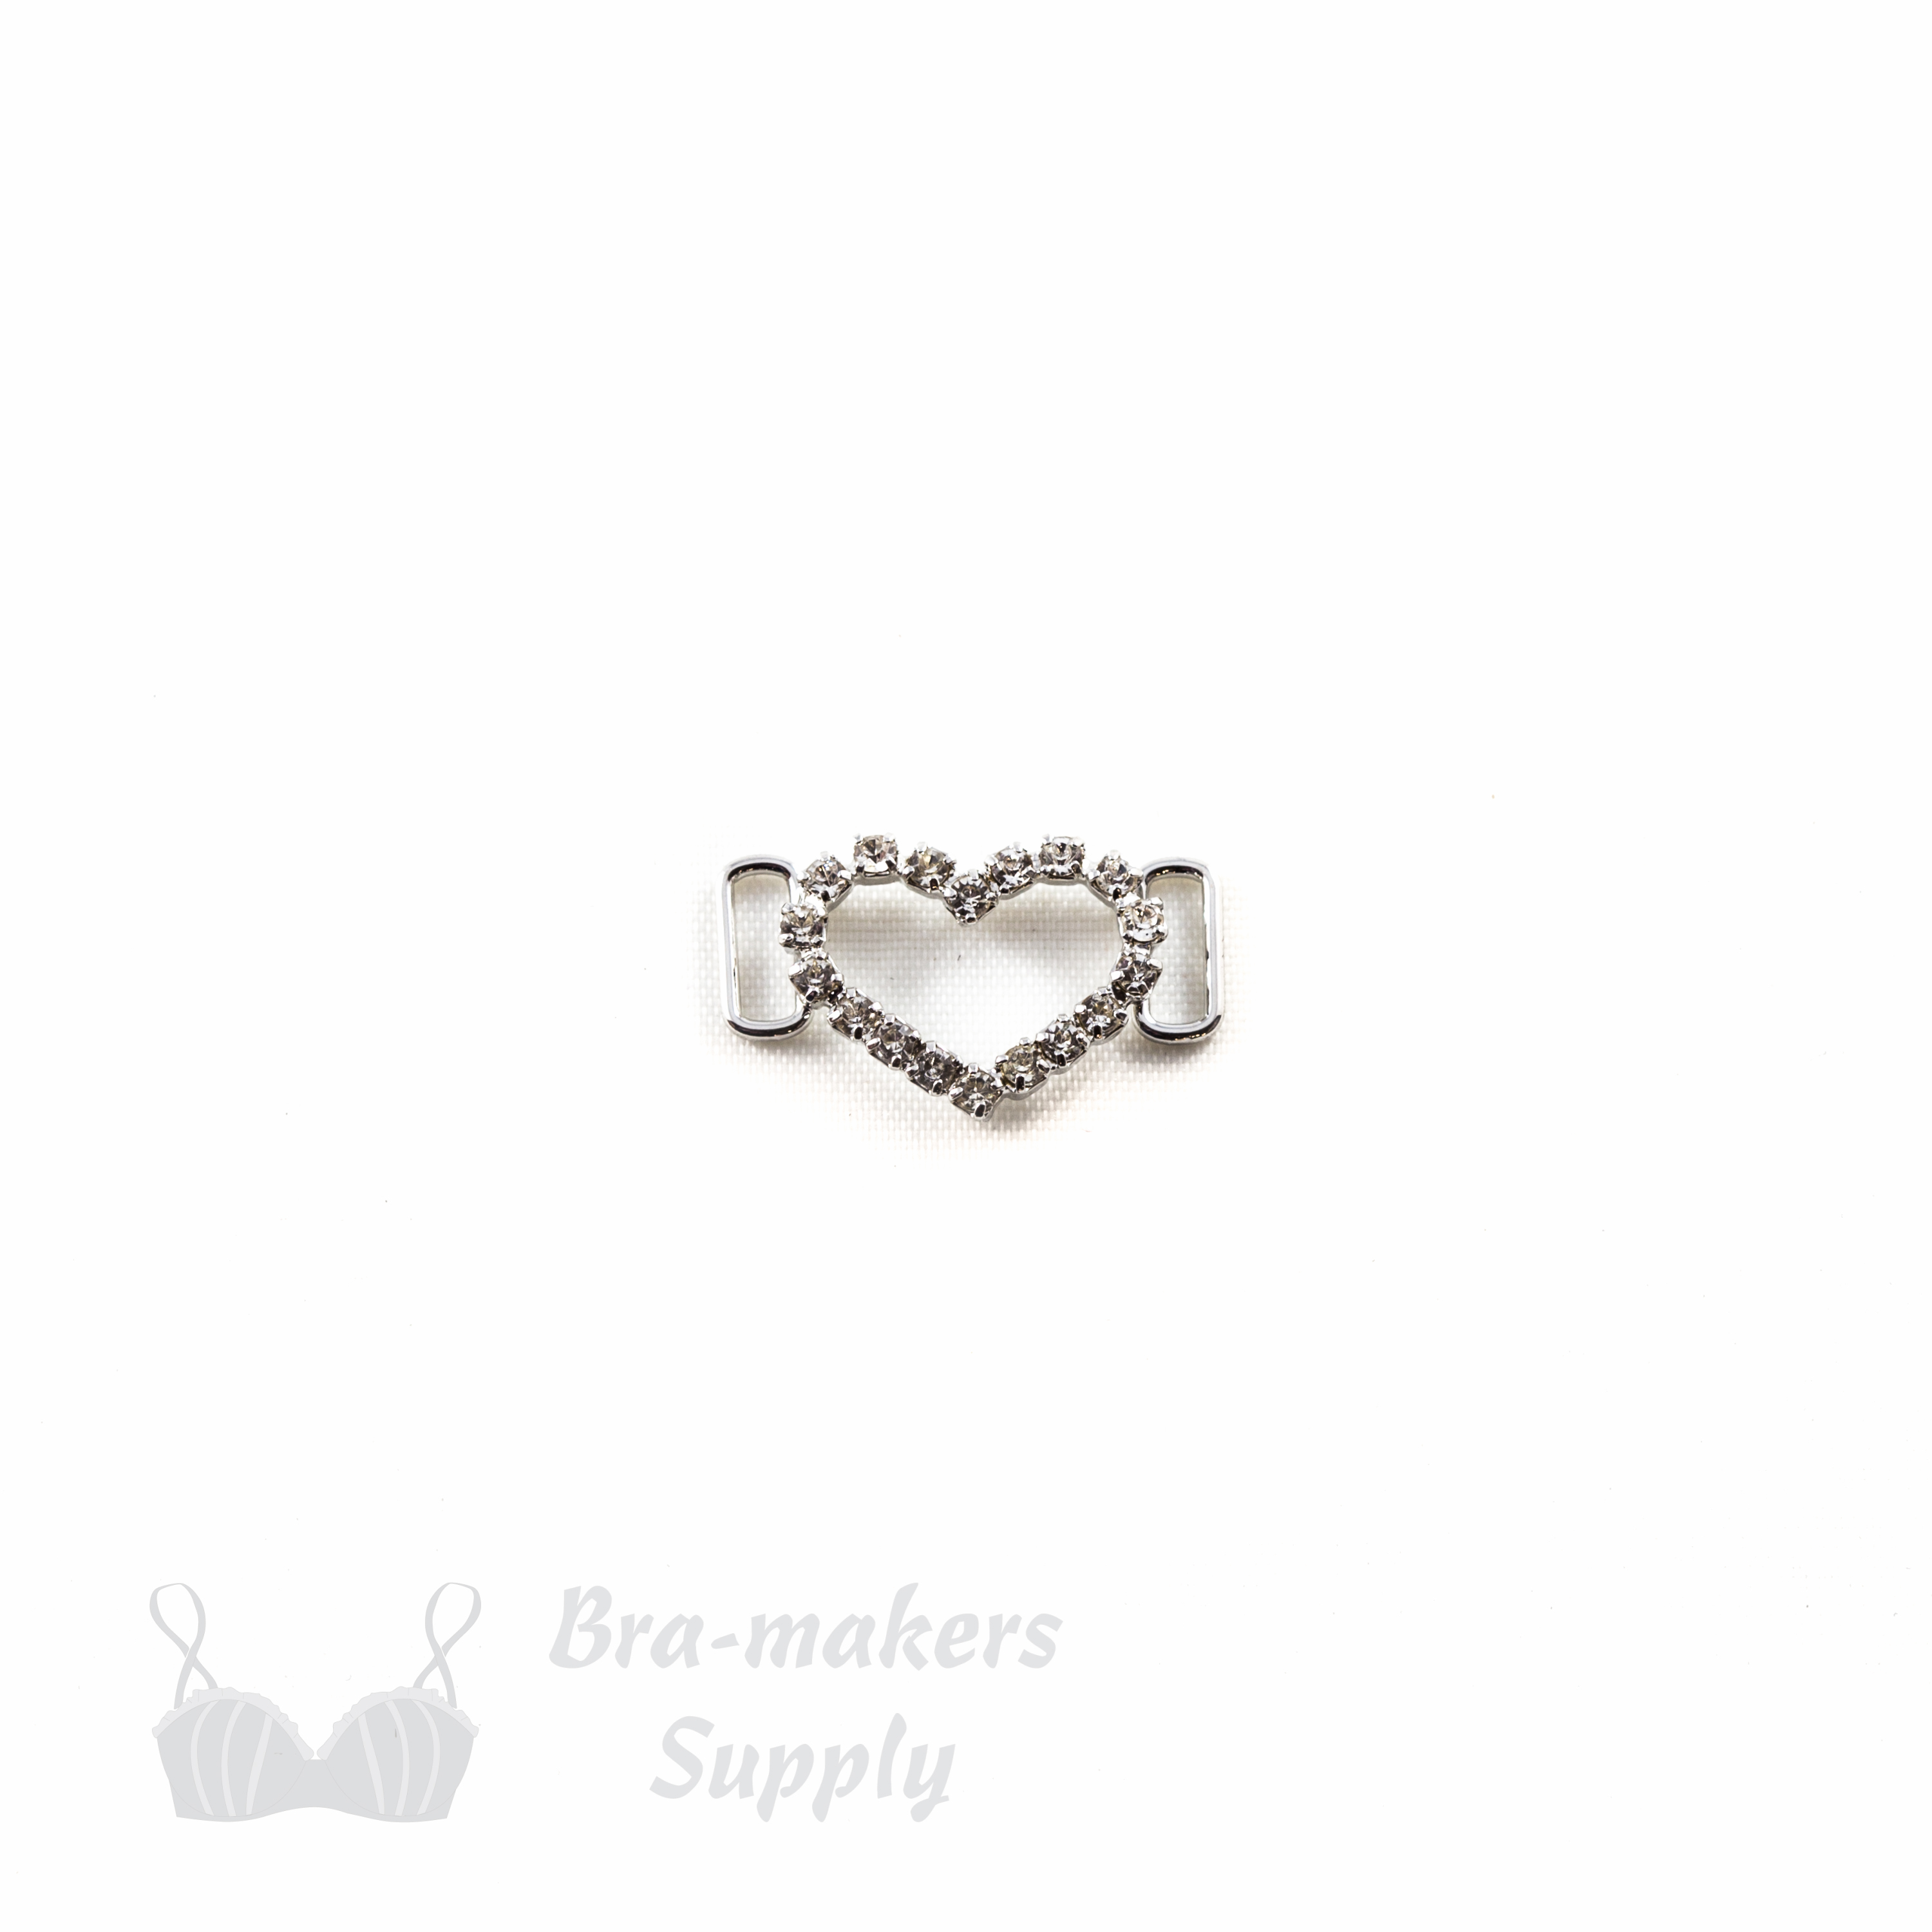 small crystal bra bridge connector strap connectors crystal heart bridge CJ-129 from Bra-Makers Supply front side shown